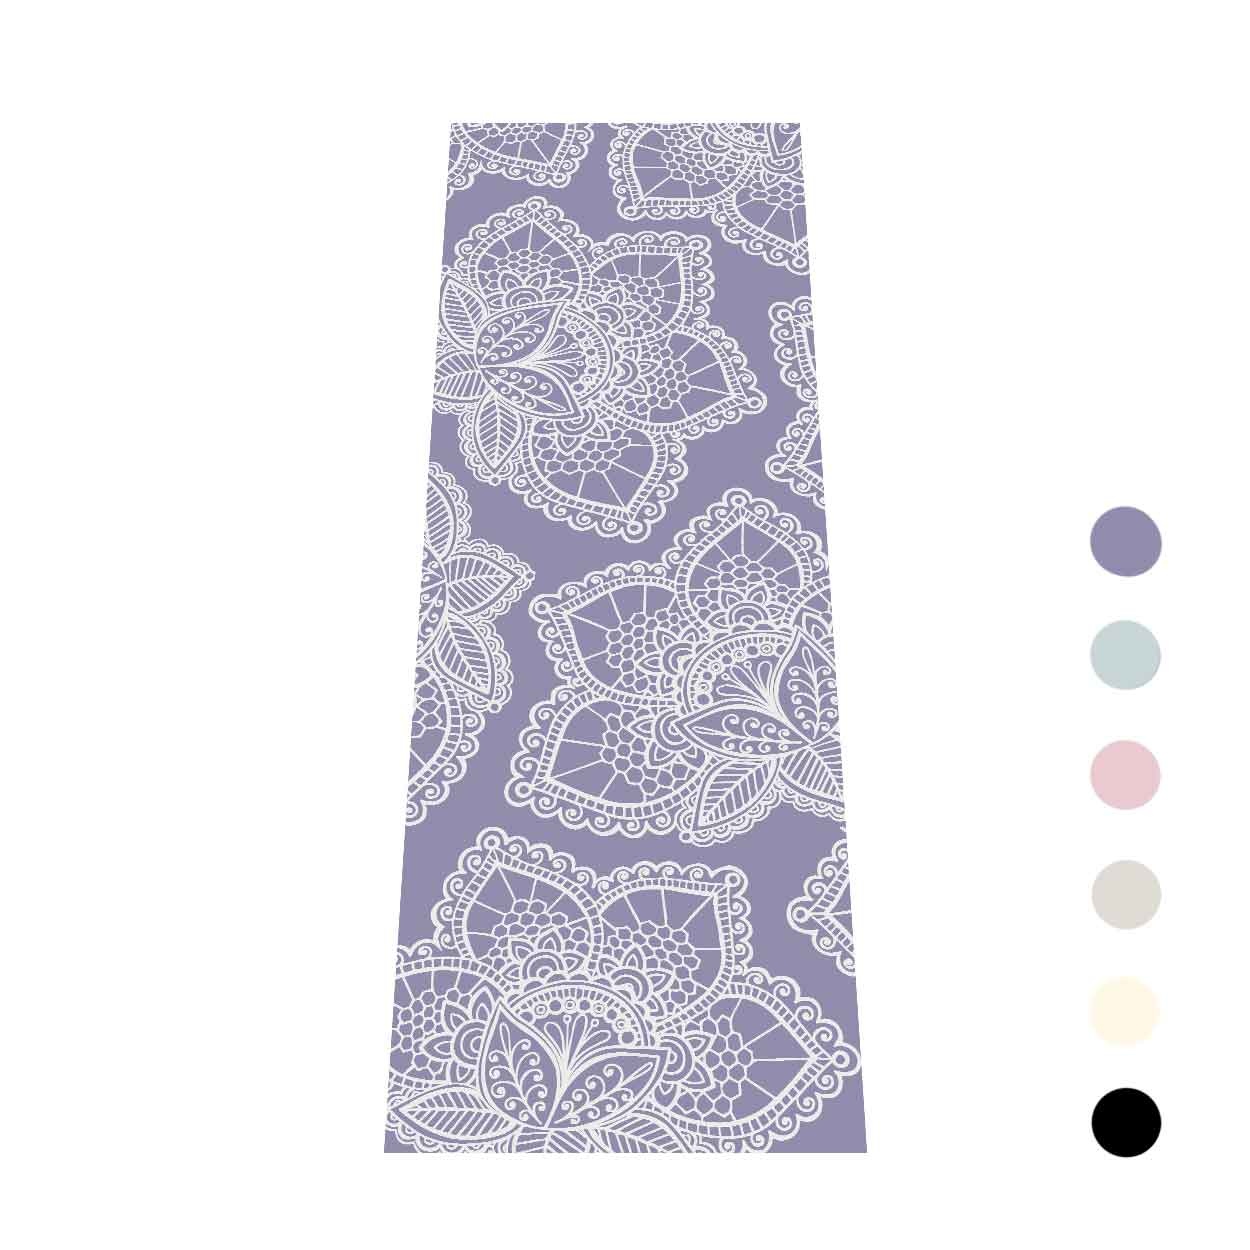  Big Beige Flower Pattern Extra Thick Yoga Mat - Eco Friendly  Non-Slip Exercise & Fitness Mat Workout Mat for All Type of Yoga, Pilates  and Floor Exercises 72x24in : Sports